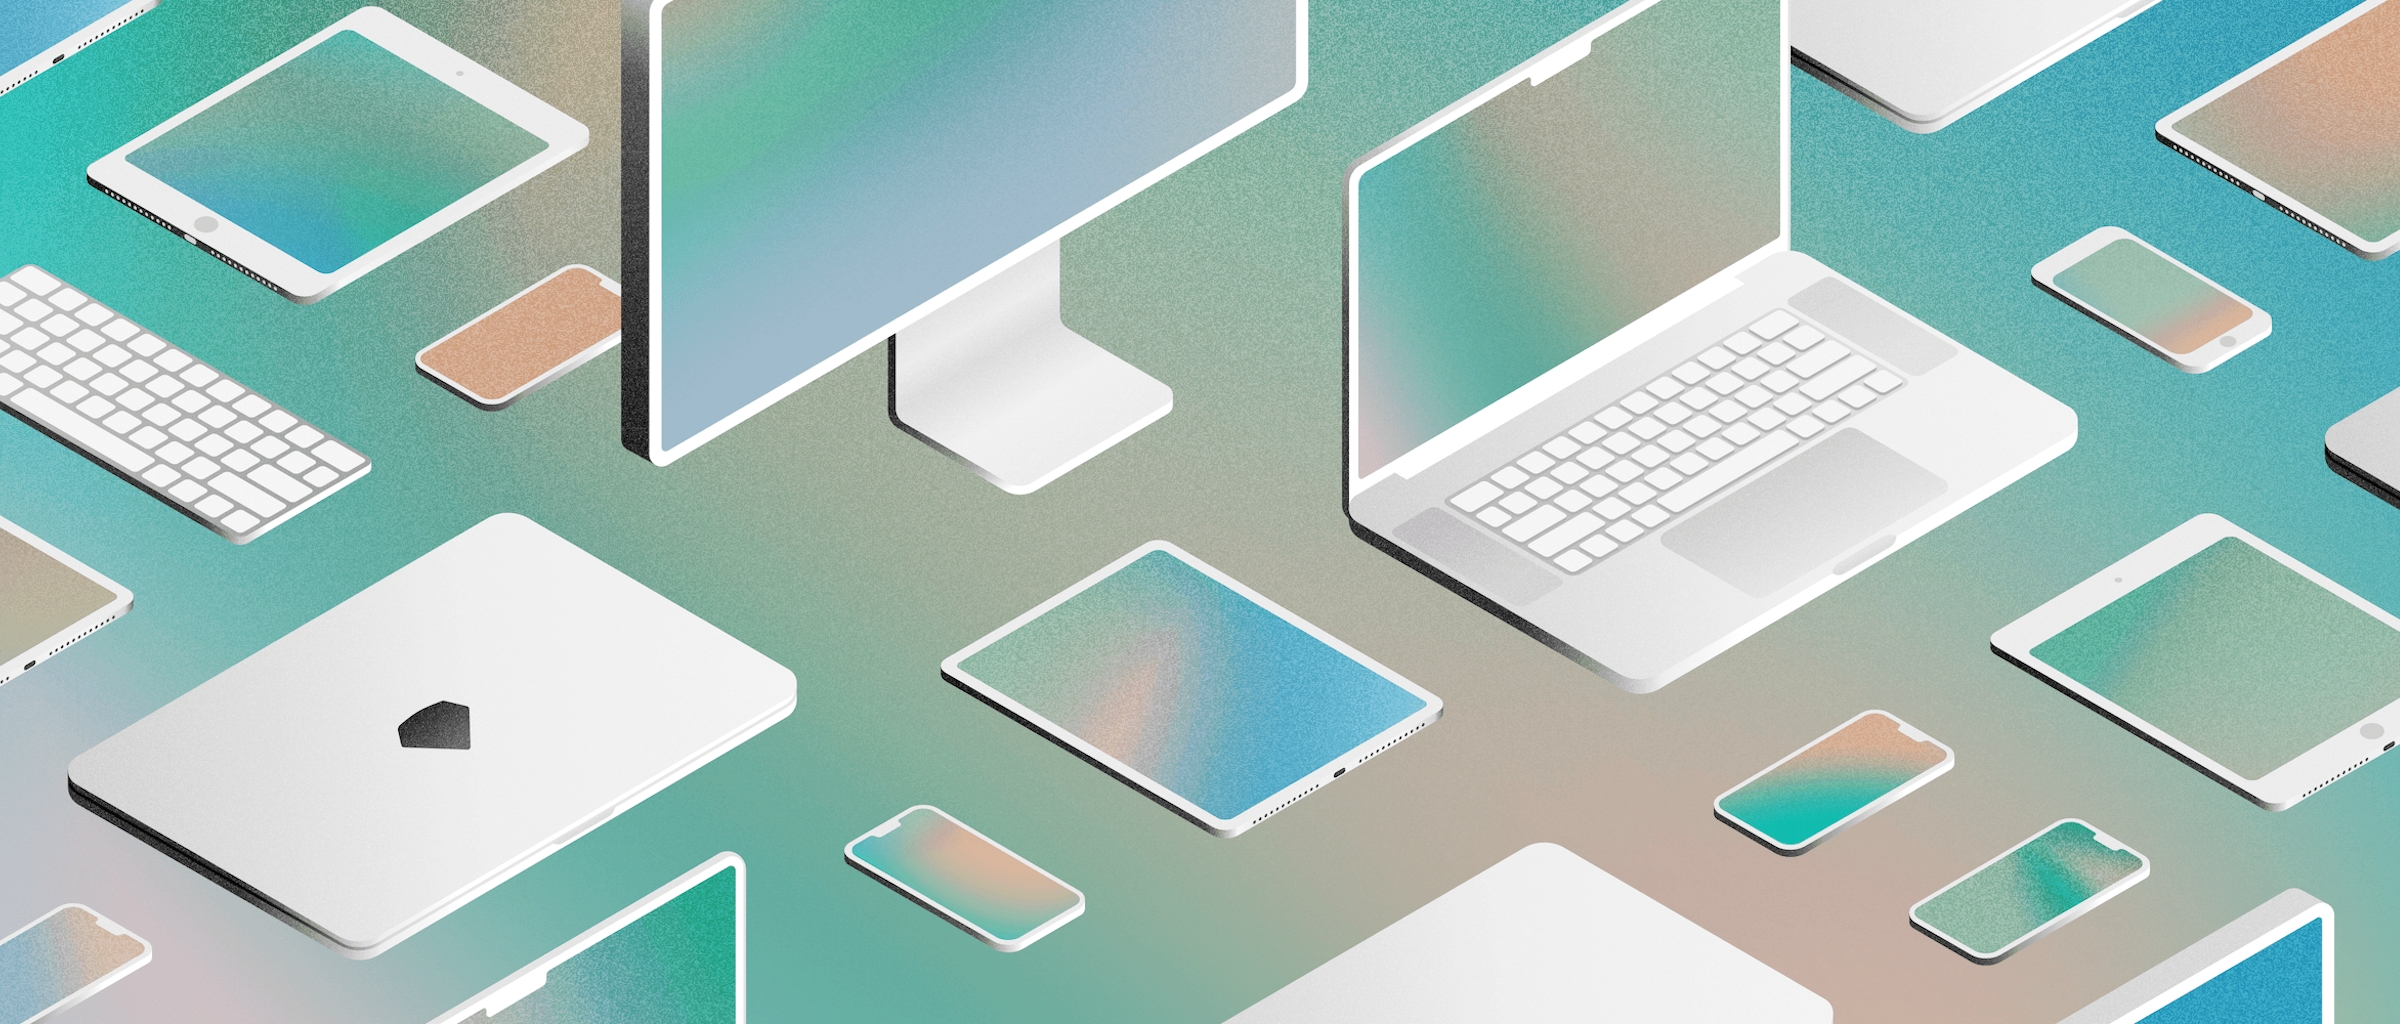 Image showing various device mockups over a teal background.